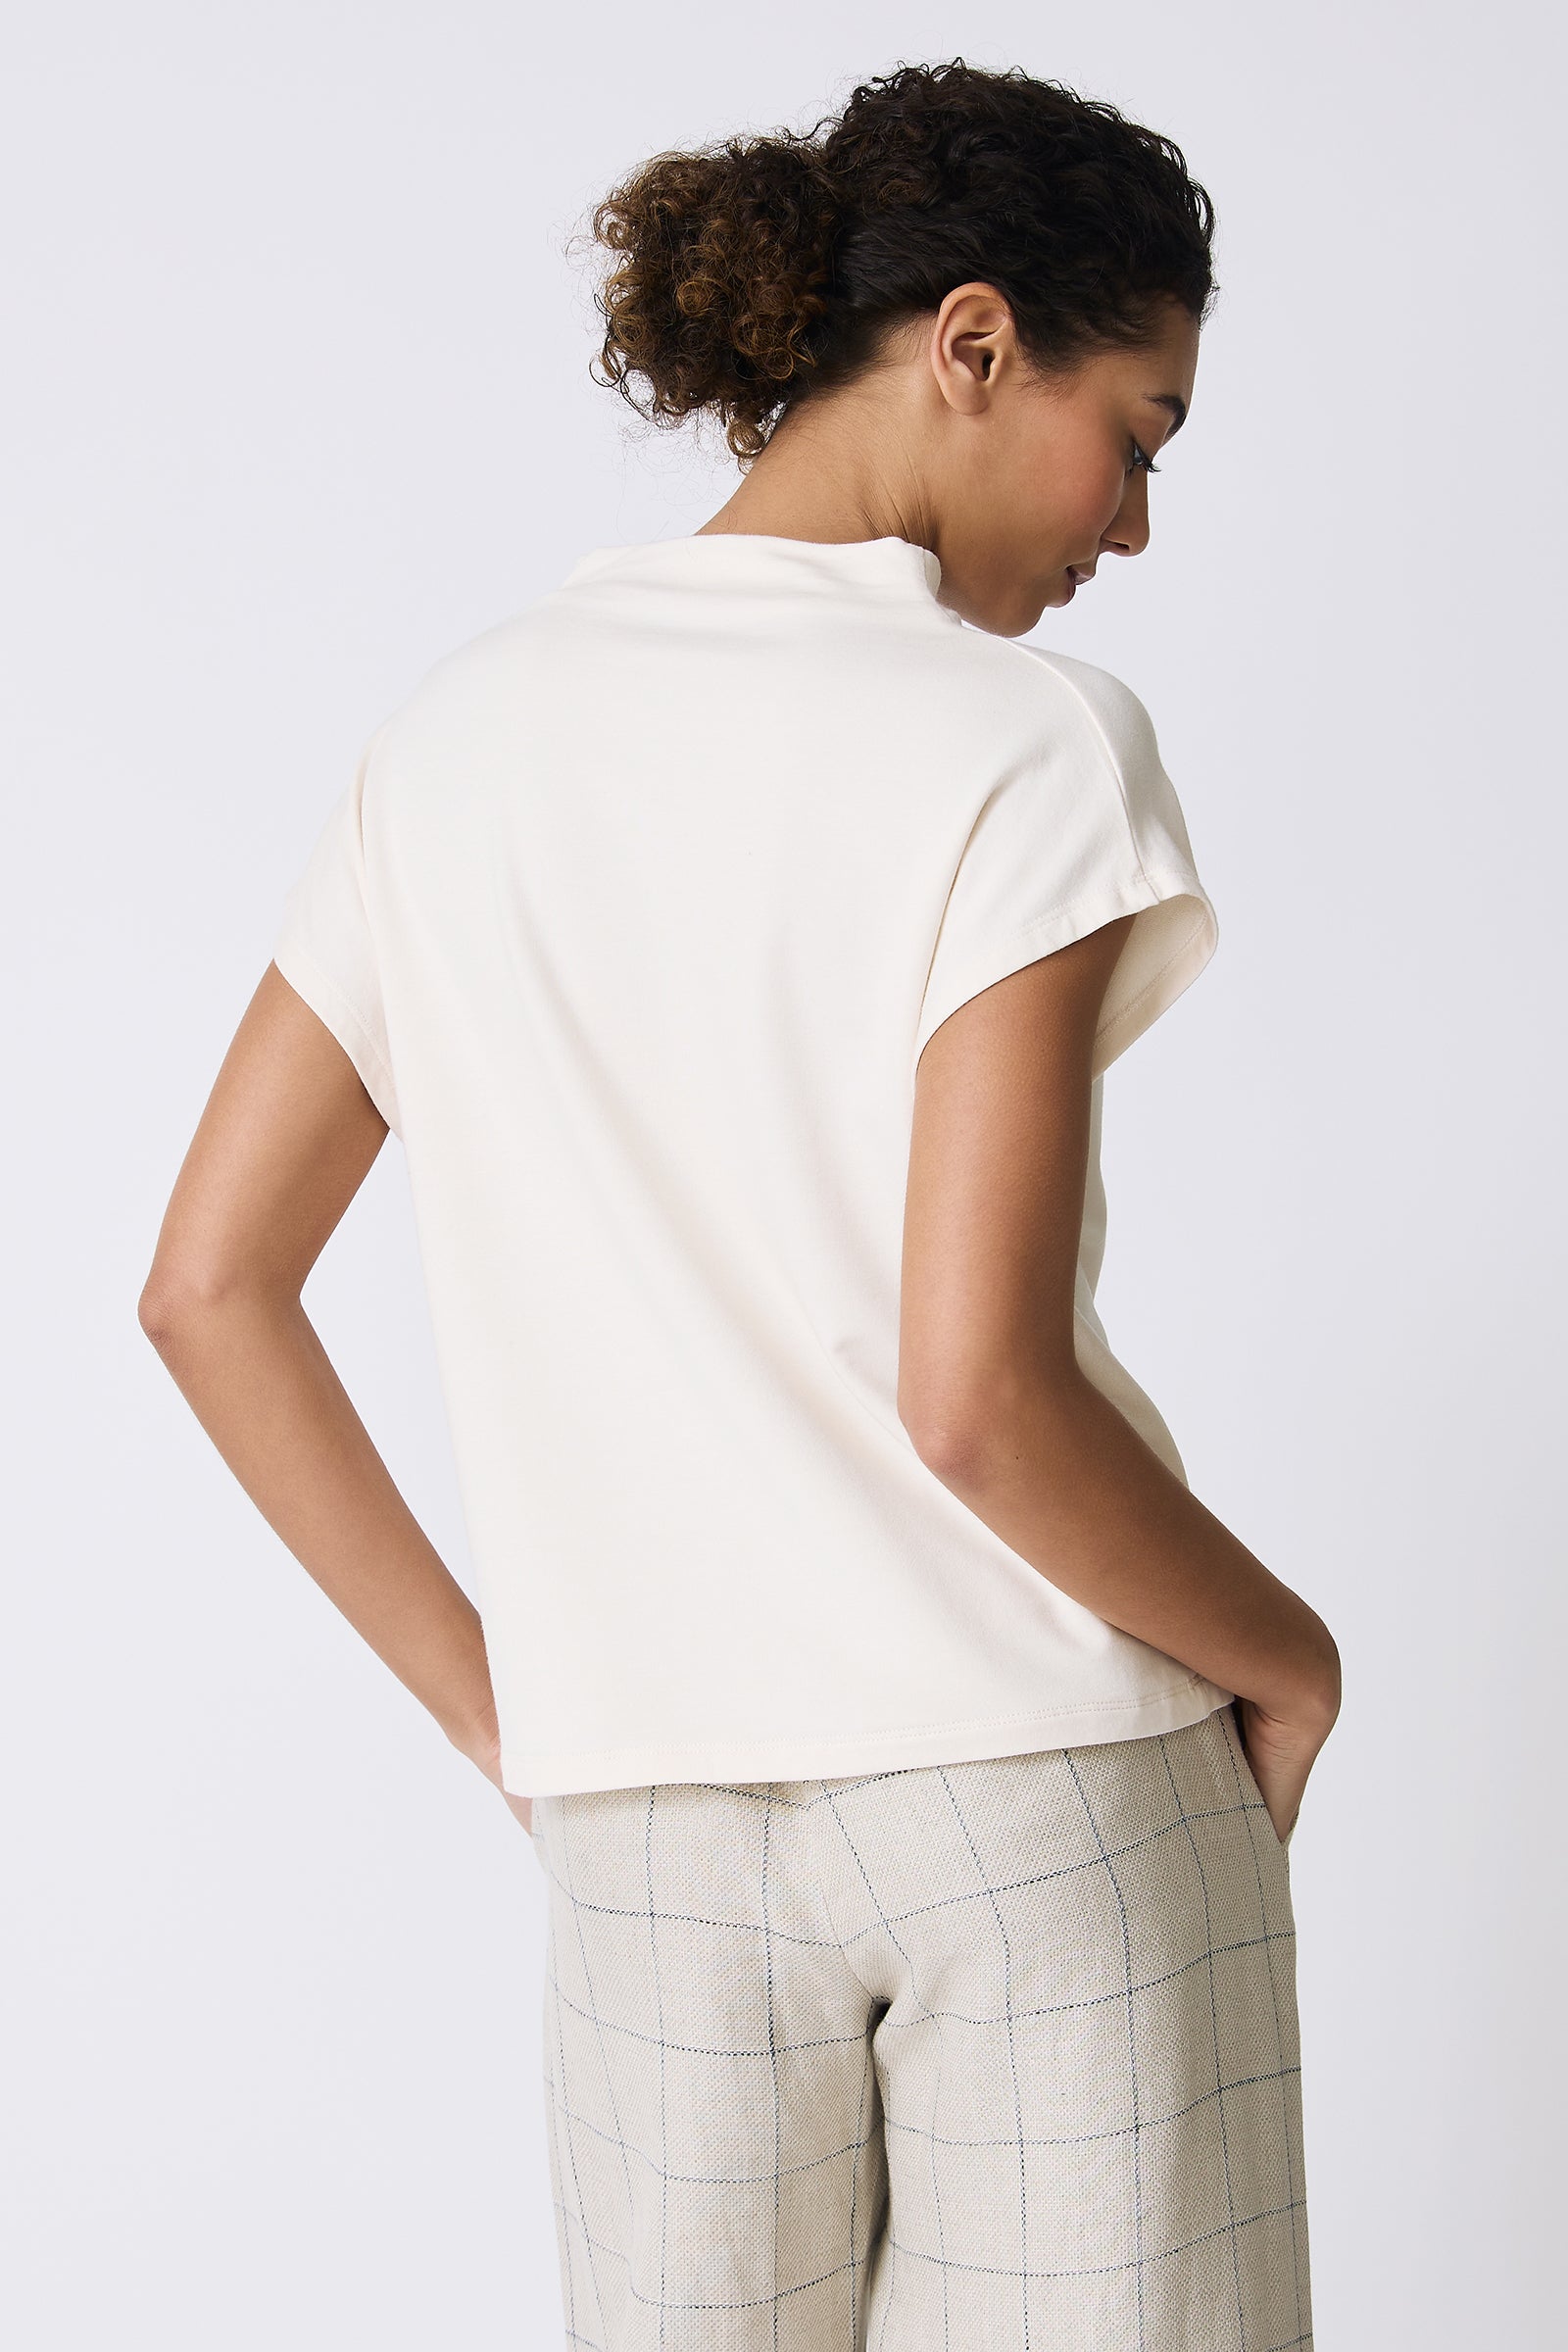 Kal Rieman Luca Cowl Top in Ivory on model back view